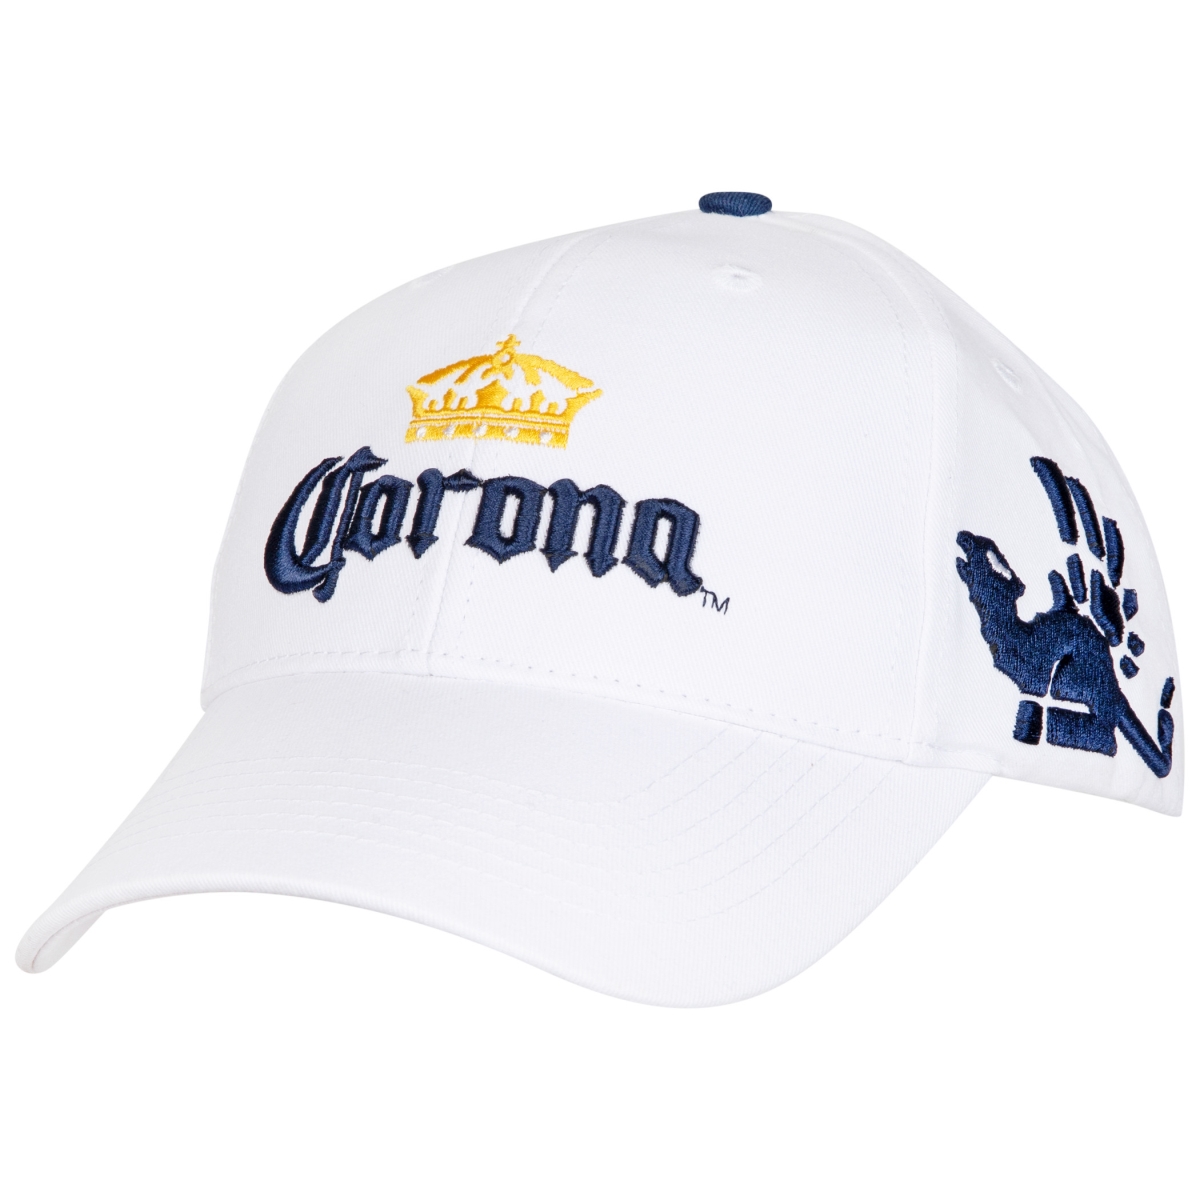 Picture of Corona Extra 821644 Crown Adjustable Strapback Hat, White